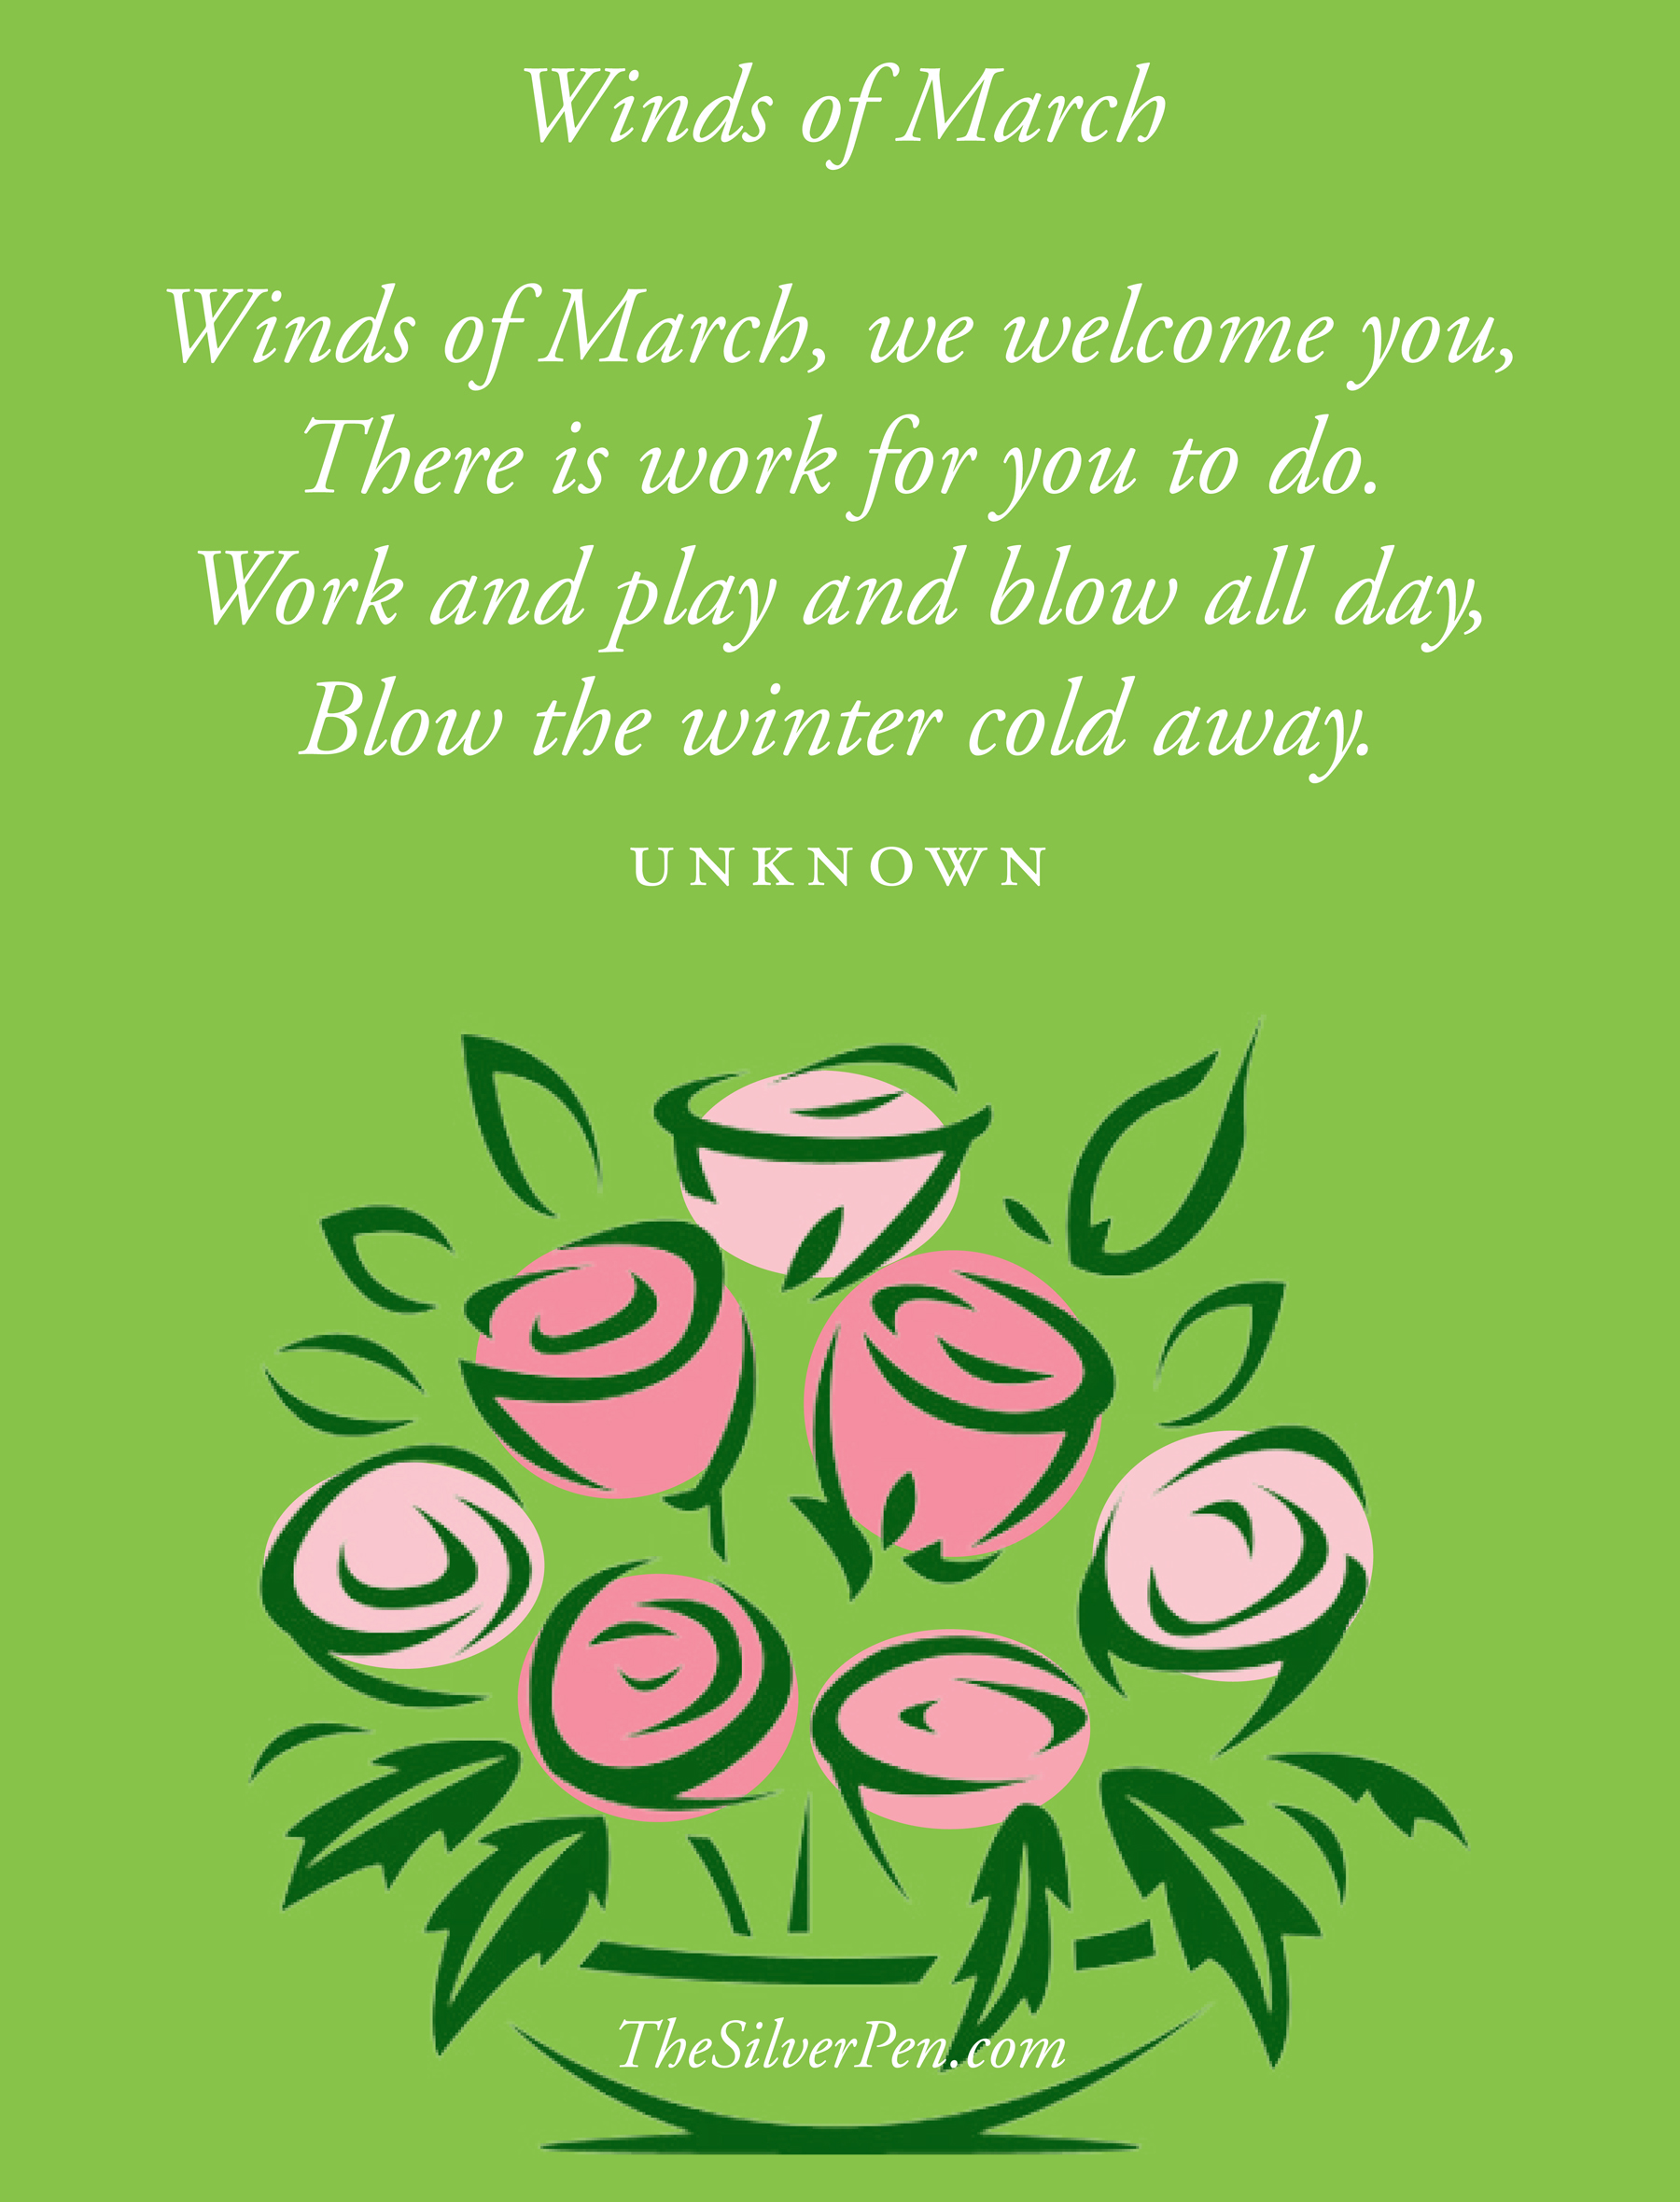 Inspirational Picture Quotes About Life Tagged With Winds Of March